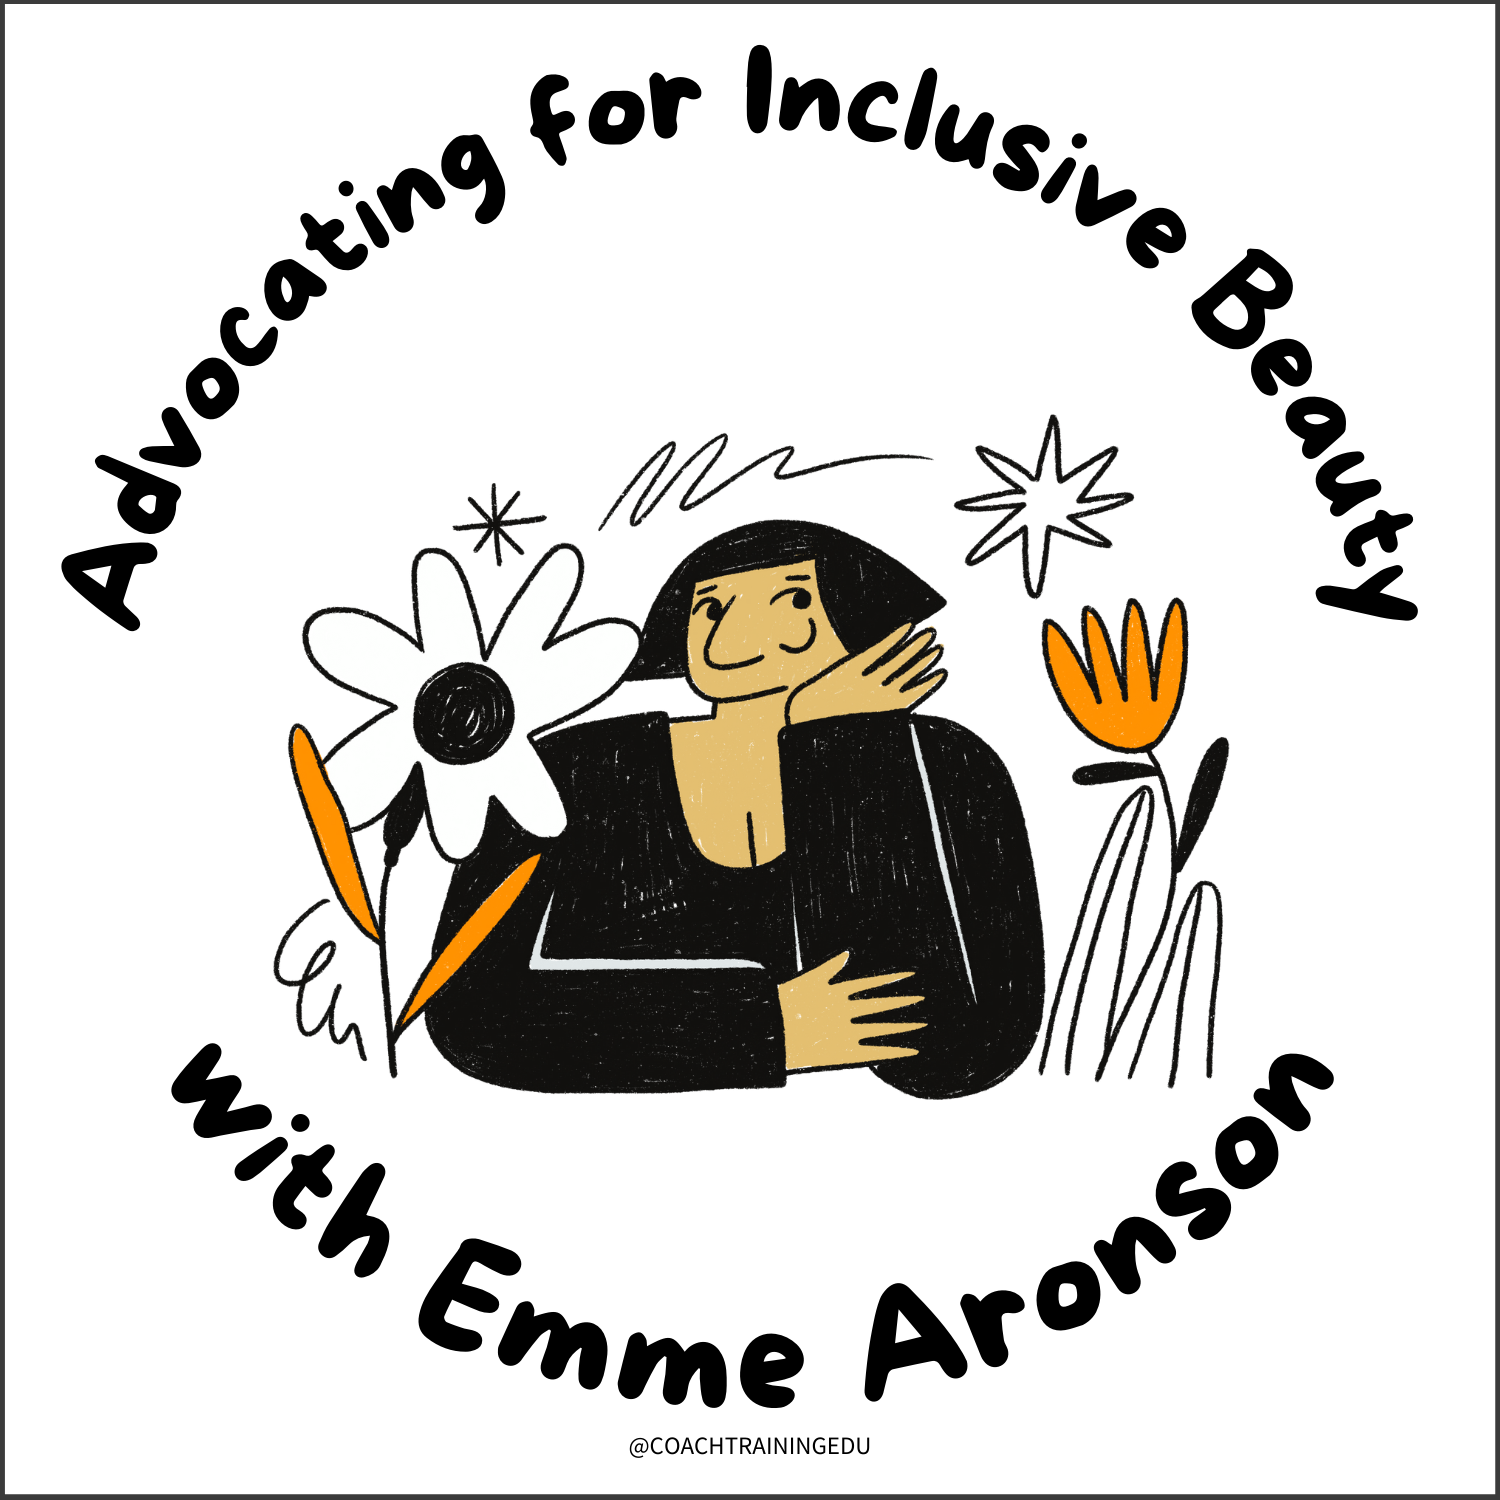 Advocating for Inclusive Beauty with Emme Aronson